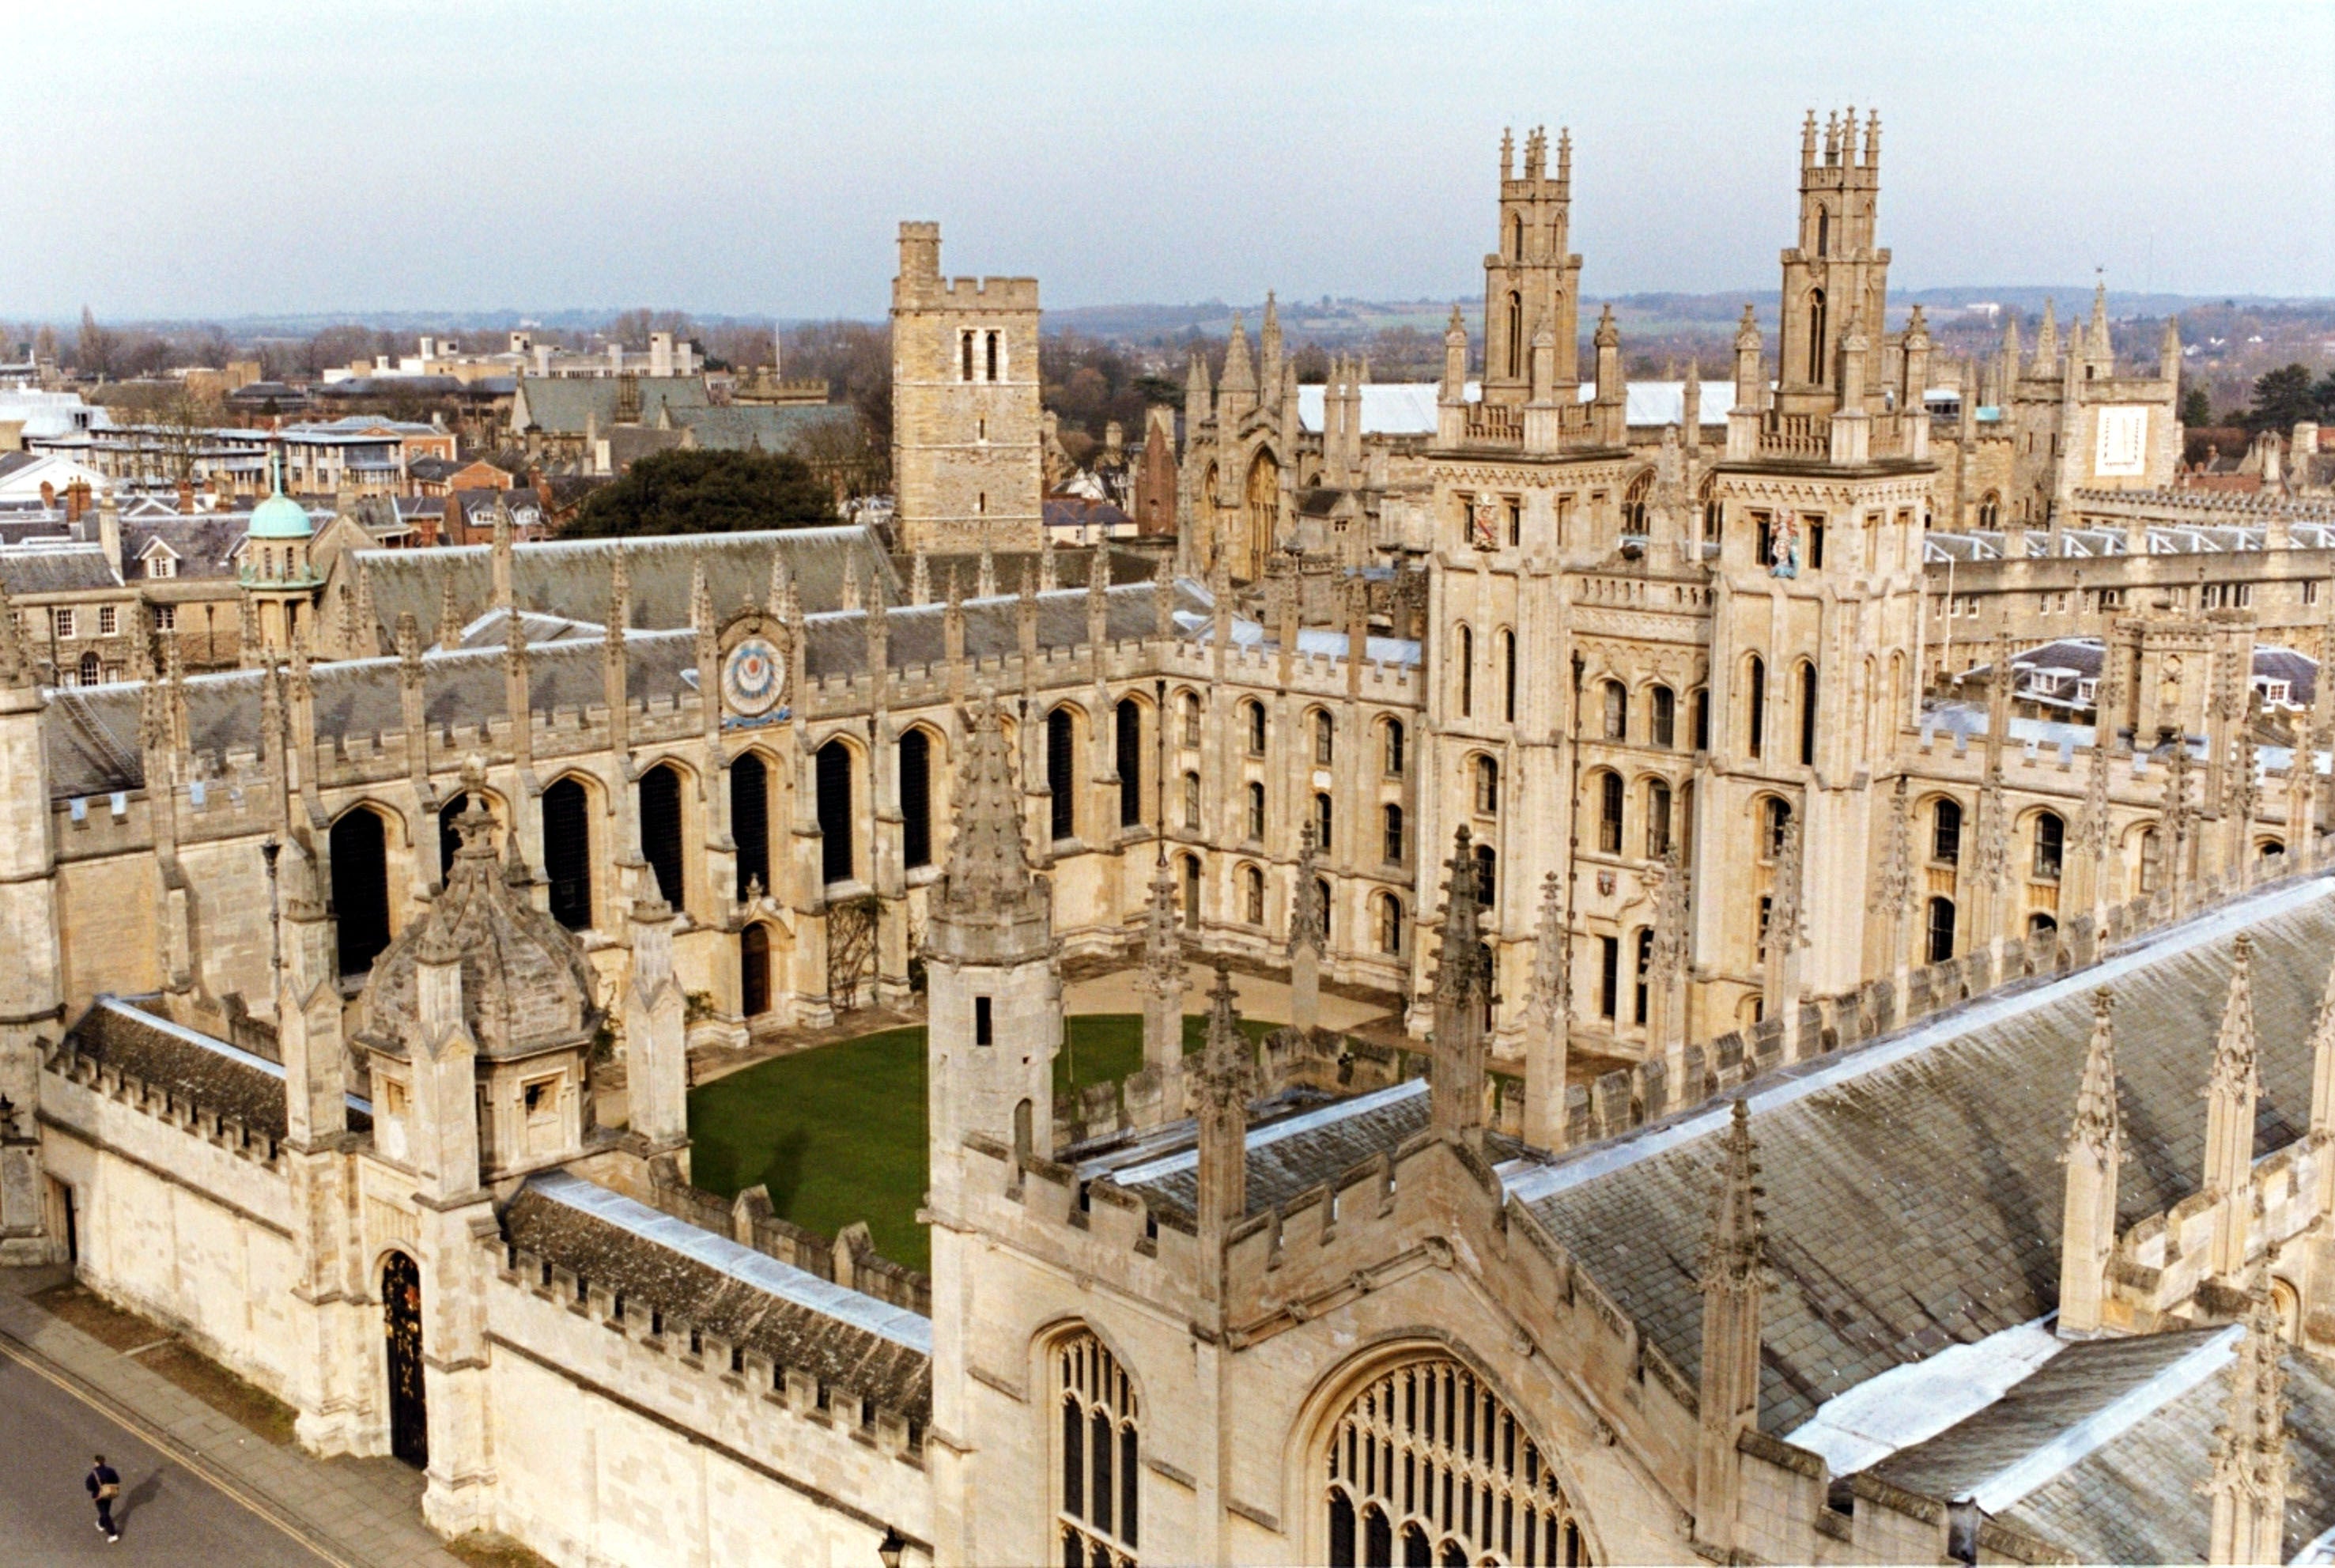 A general view of All Souls’ College from the Church of St Mary the Virgin, Oxford University. In the background to the right is New College. To the left is the Old Quadrangle of Hertford College. Education Secretary Nadhim Zahawi has pushed back against the idea elite universities like Oxford and Cambridge should “tilt the system” to accept more pupils from state schools (William Conran/PA)